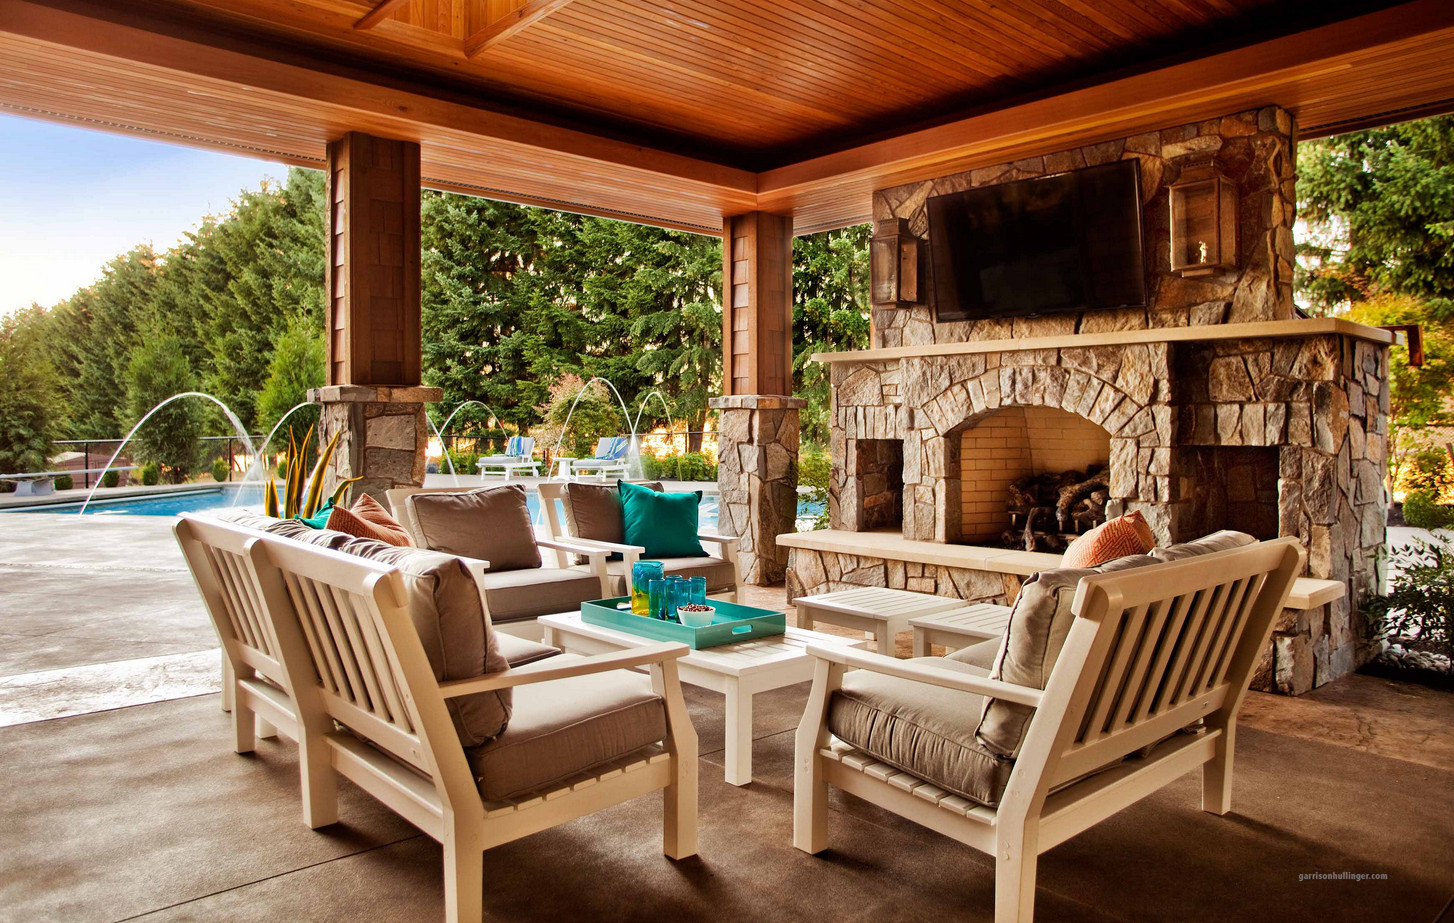 Covered Patios with Fireplaces  6